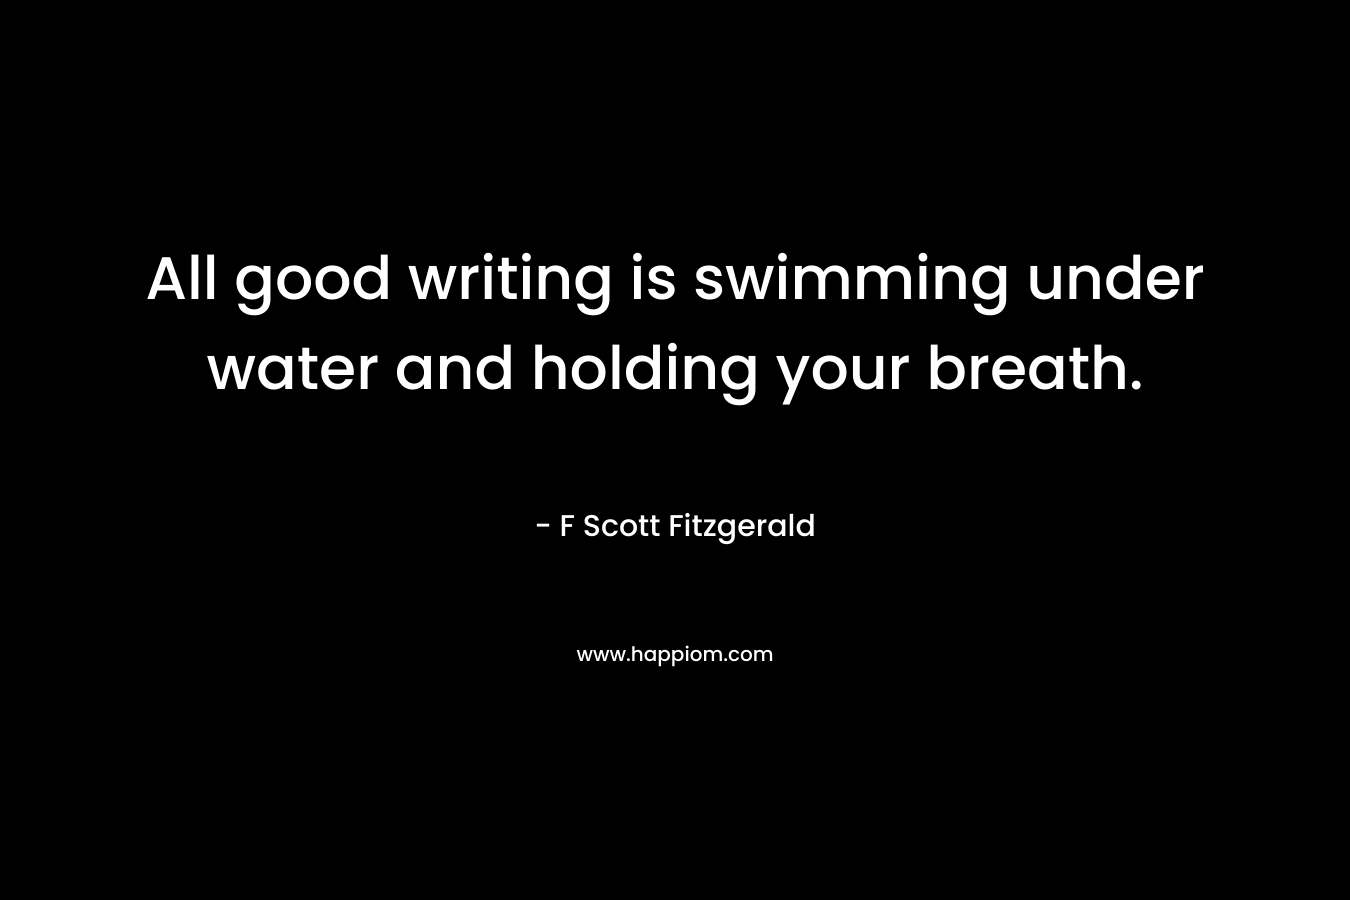 All good writing is swimming under water and holding your breath. – F Scott Fitzgerald